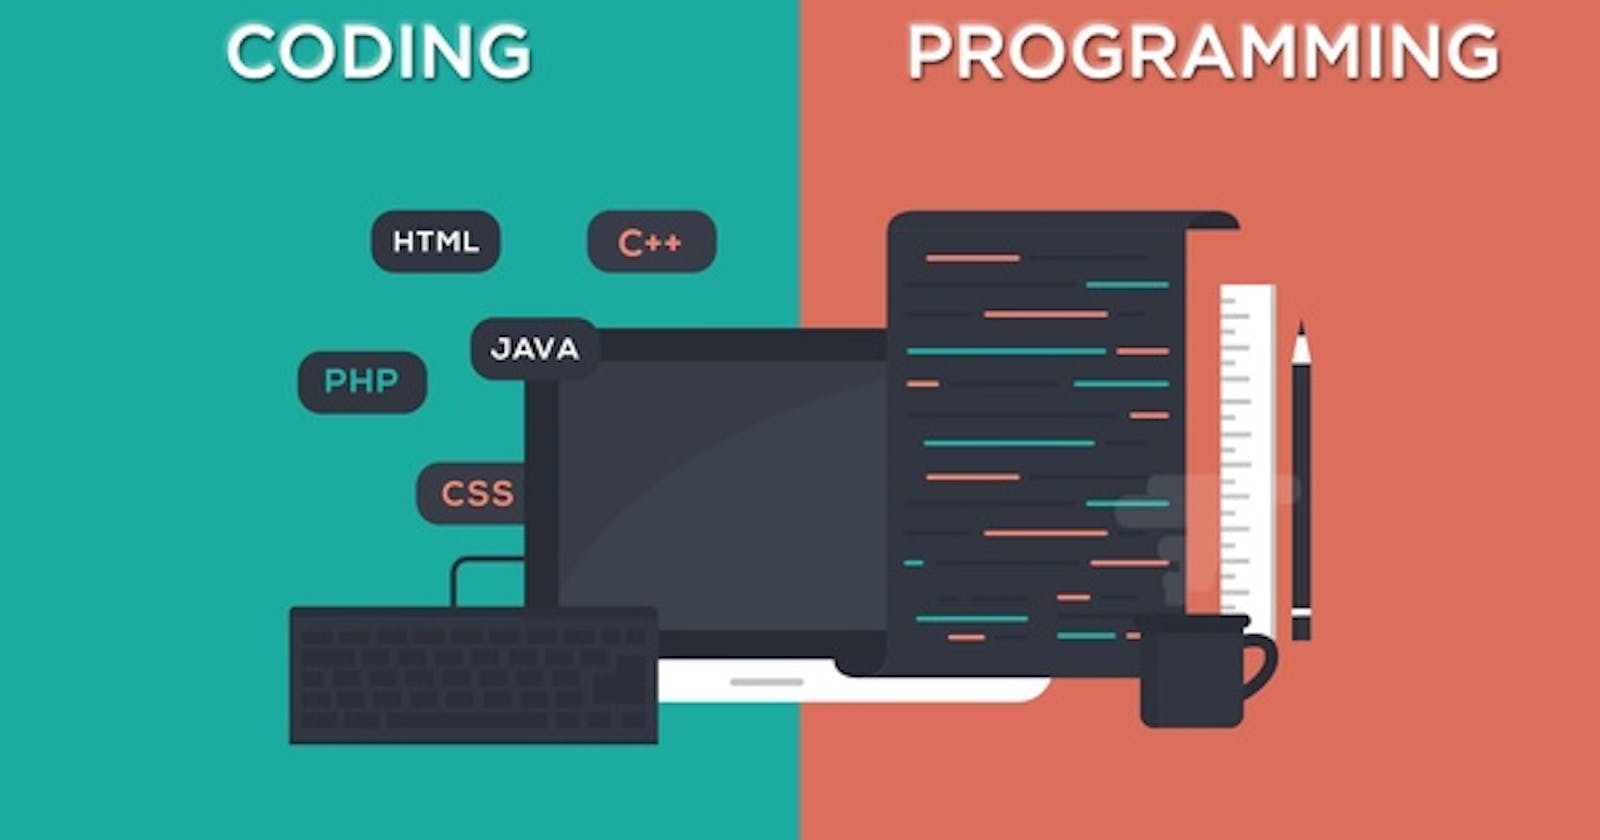 Are you a coder or a programmer?